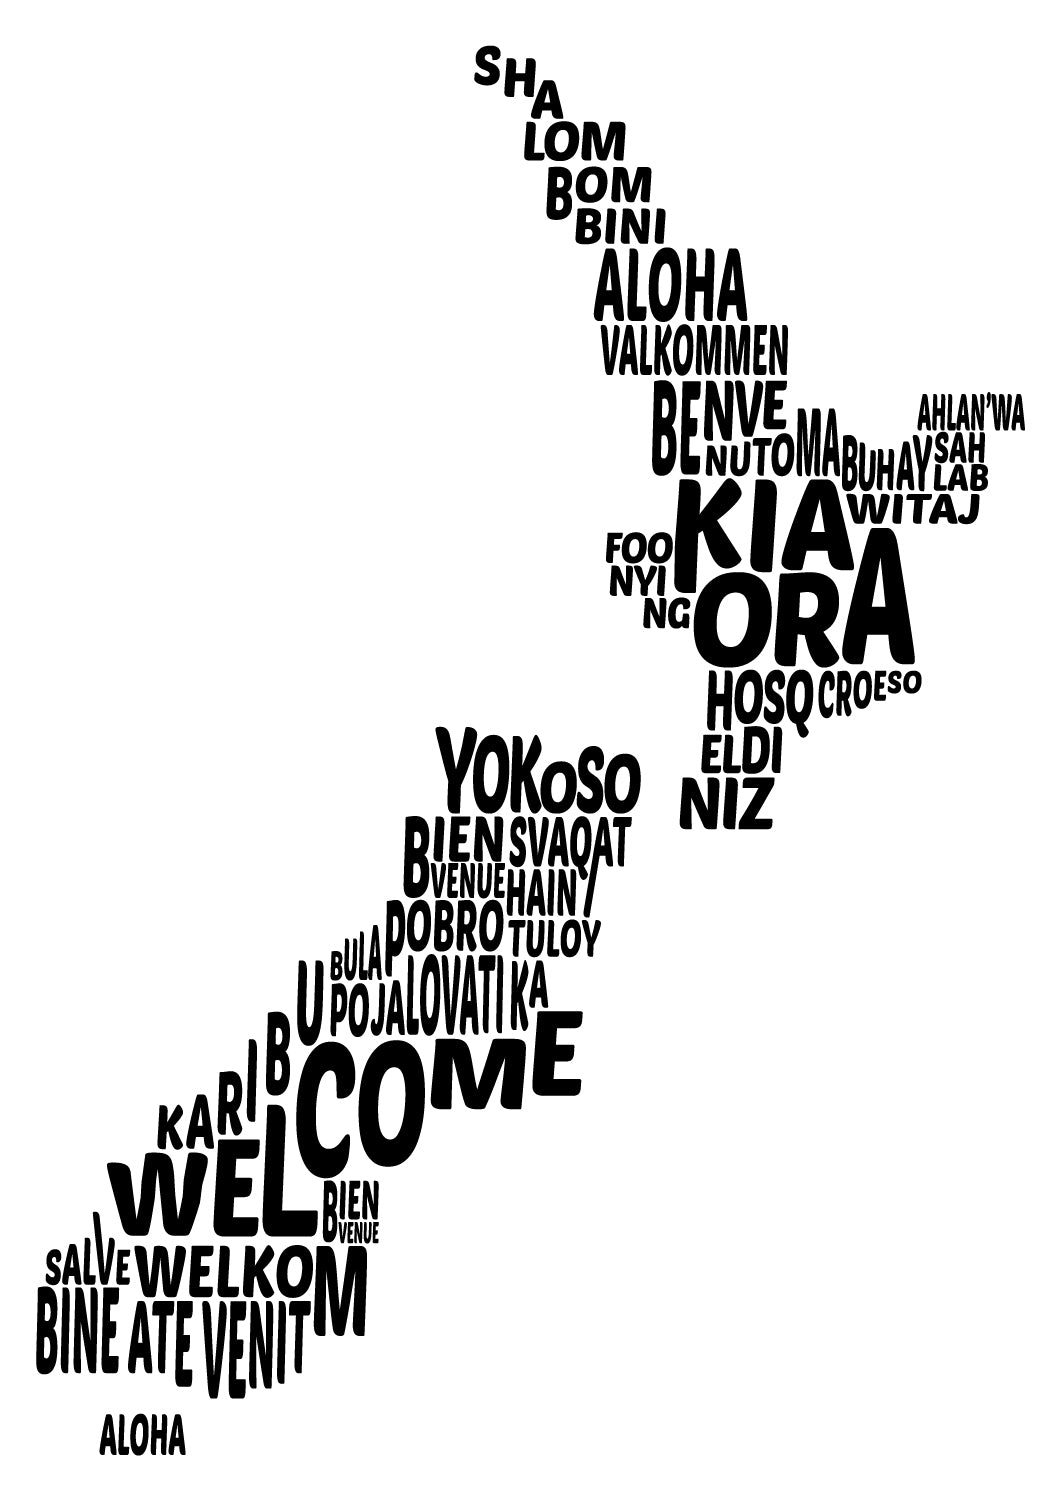 Kia Ora Map Wall Decal Your Decal Shop Wall Decal NZ